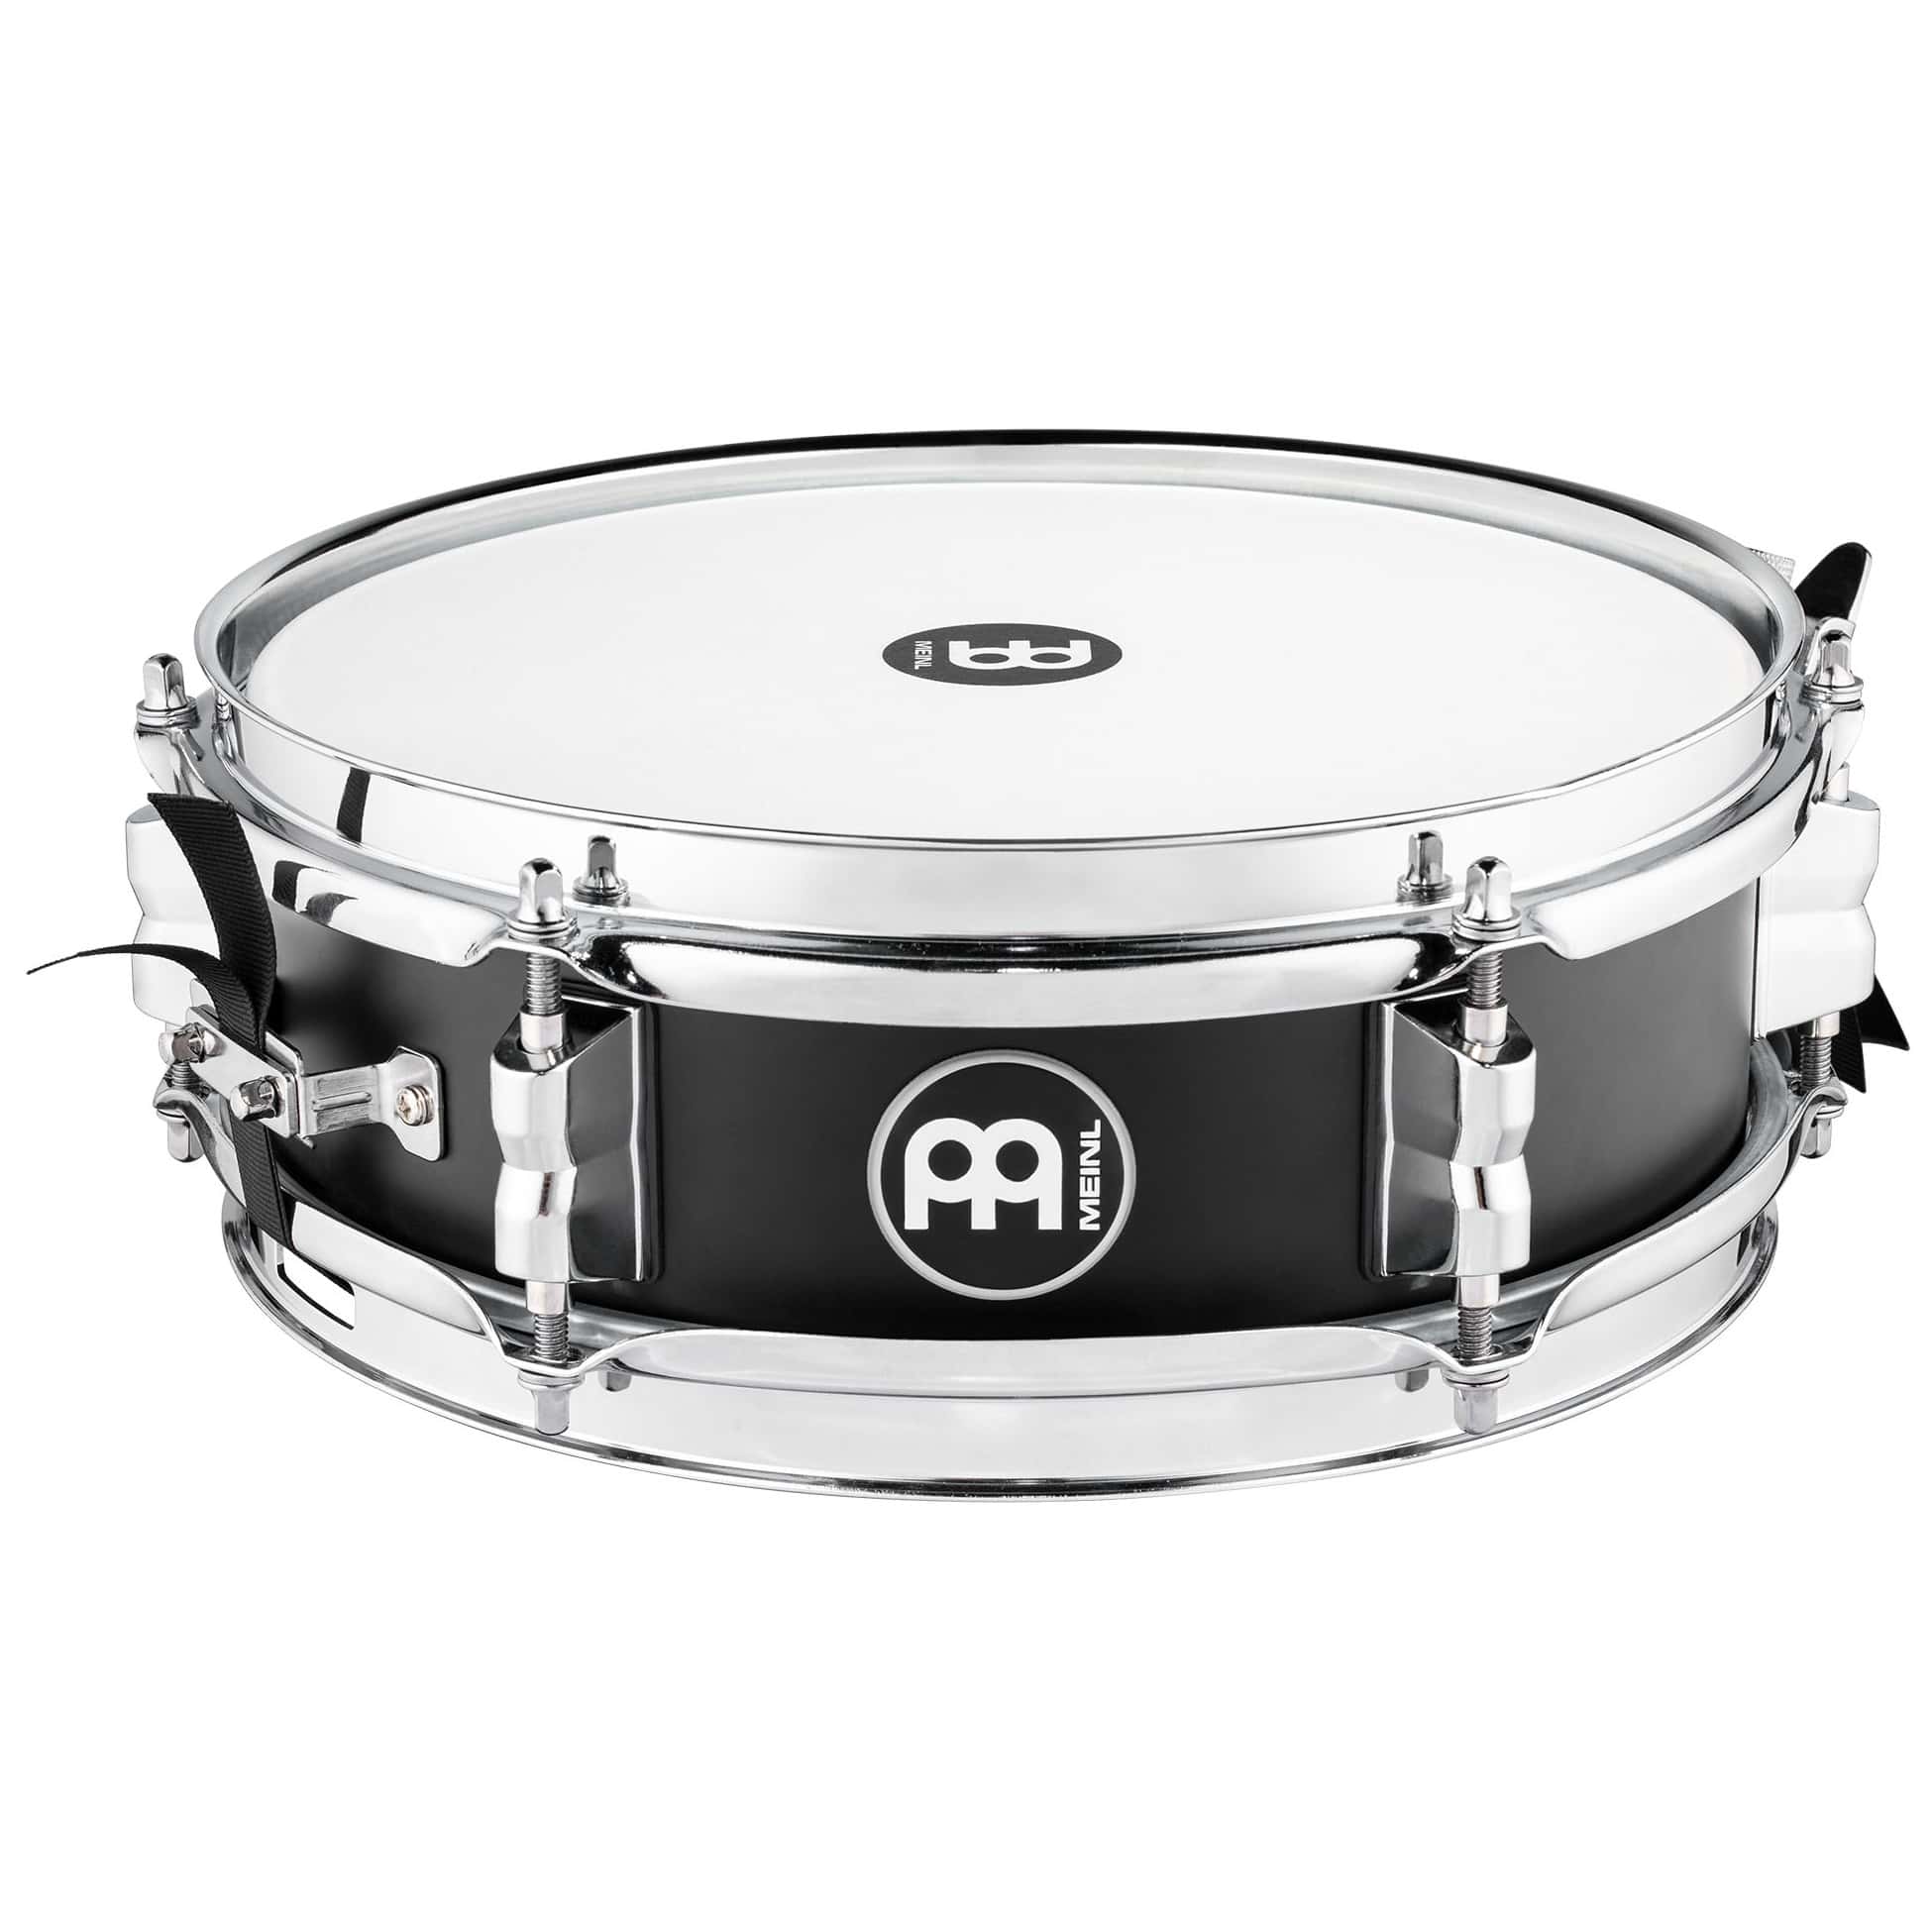 Meinl Percussion MPCSS - Compact Side Snare Drum 10" 1